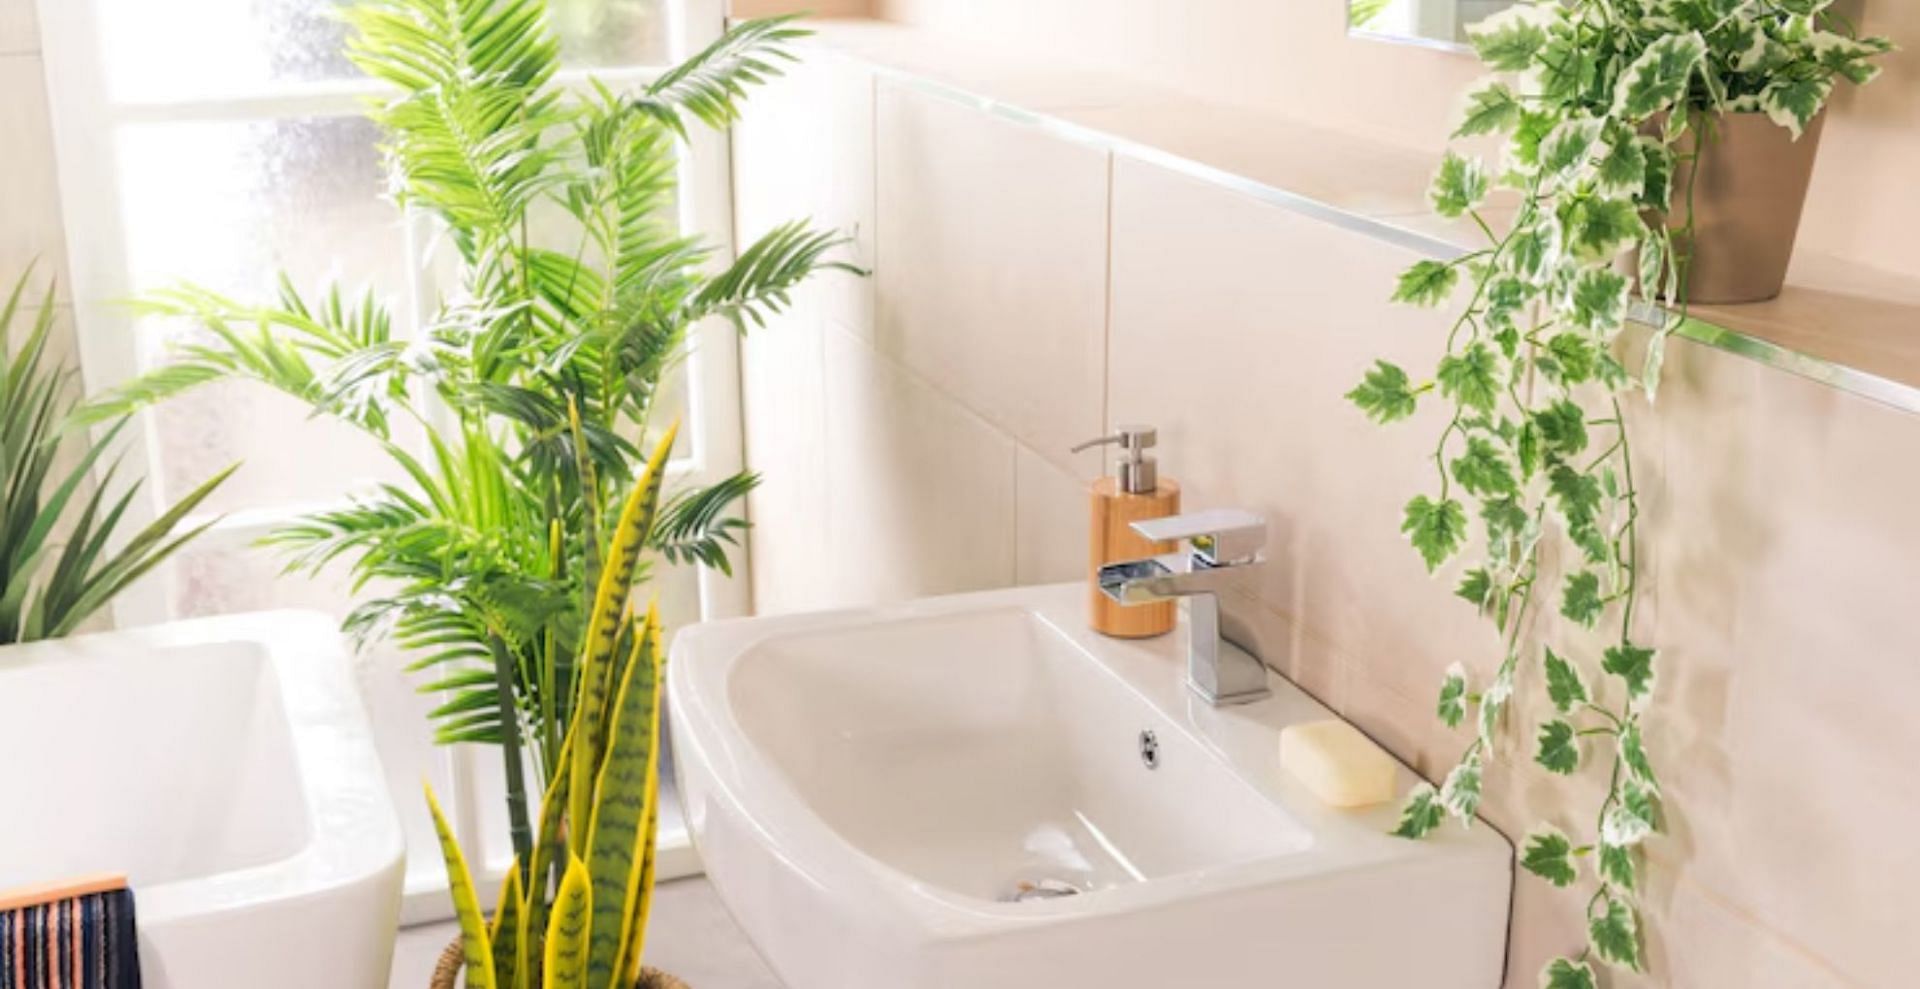 Ways to revamp a small bathroom on a budget